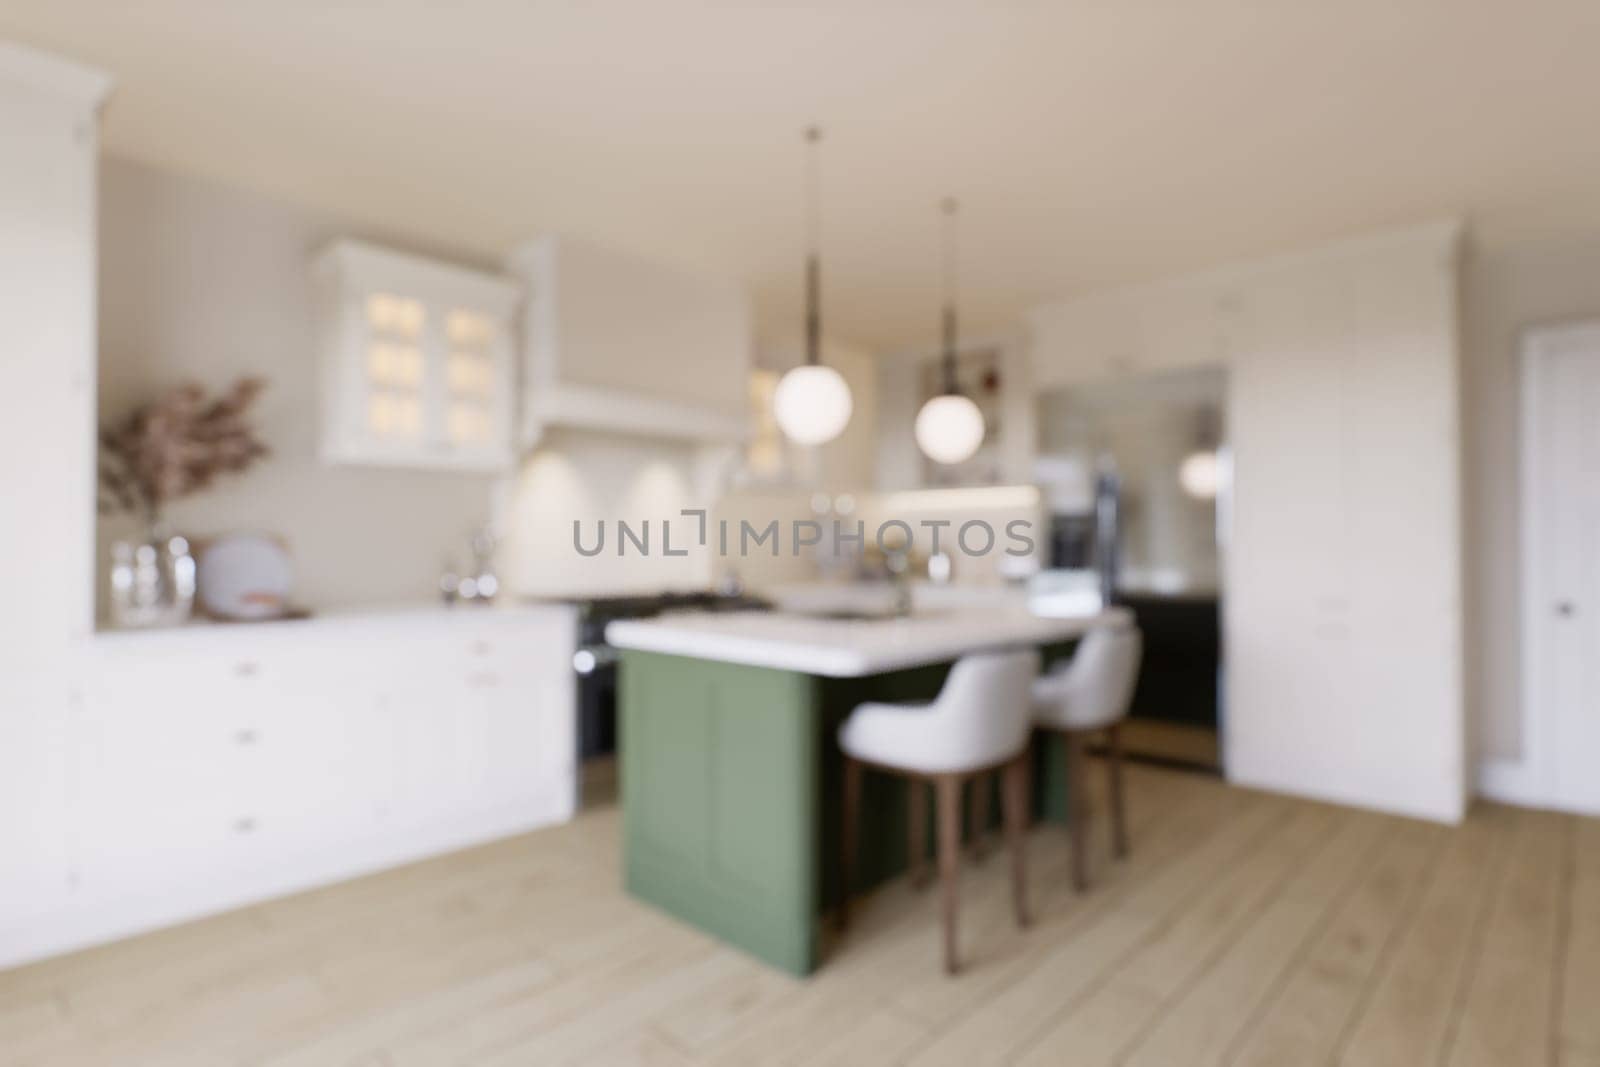 The kitchen is out of focus, with blurry bokeh. by N_Design